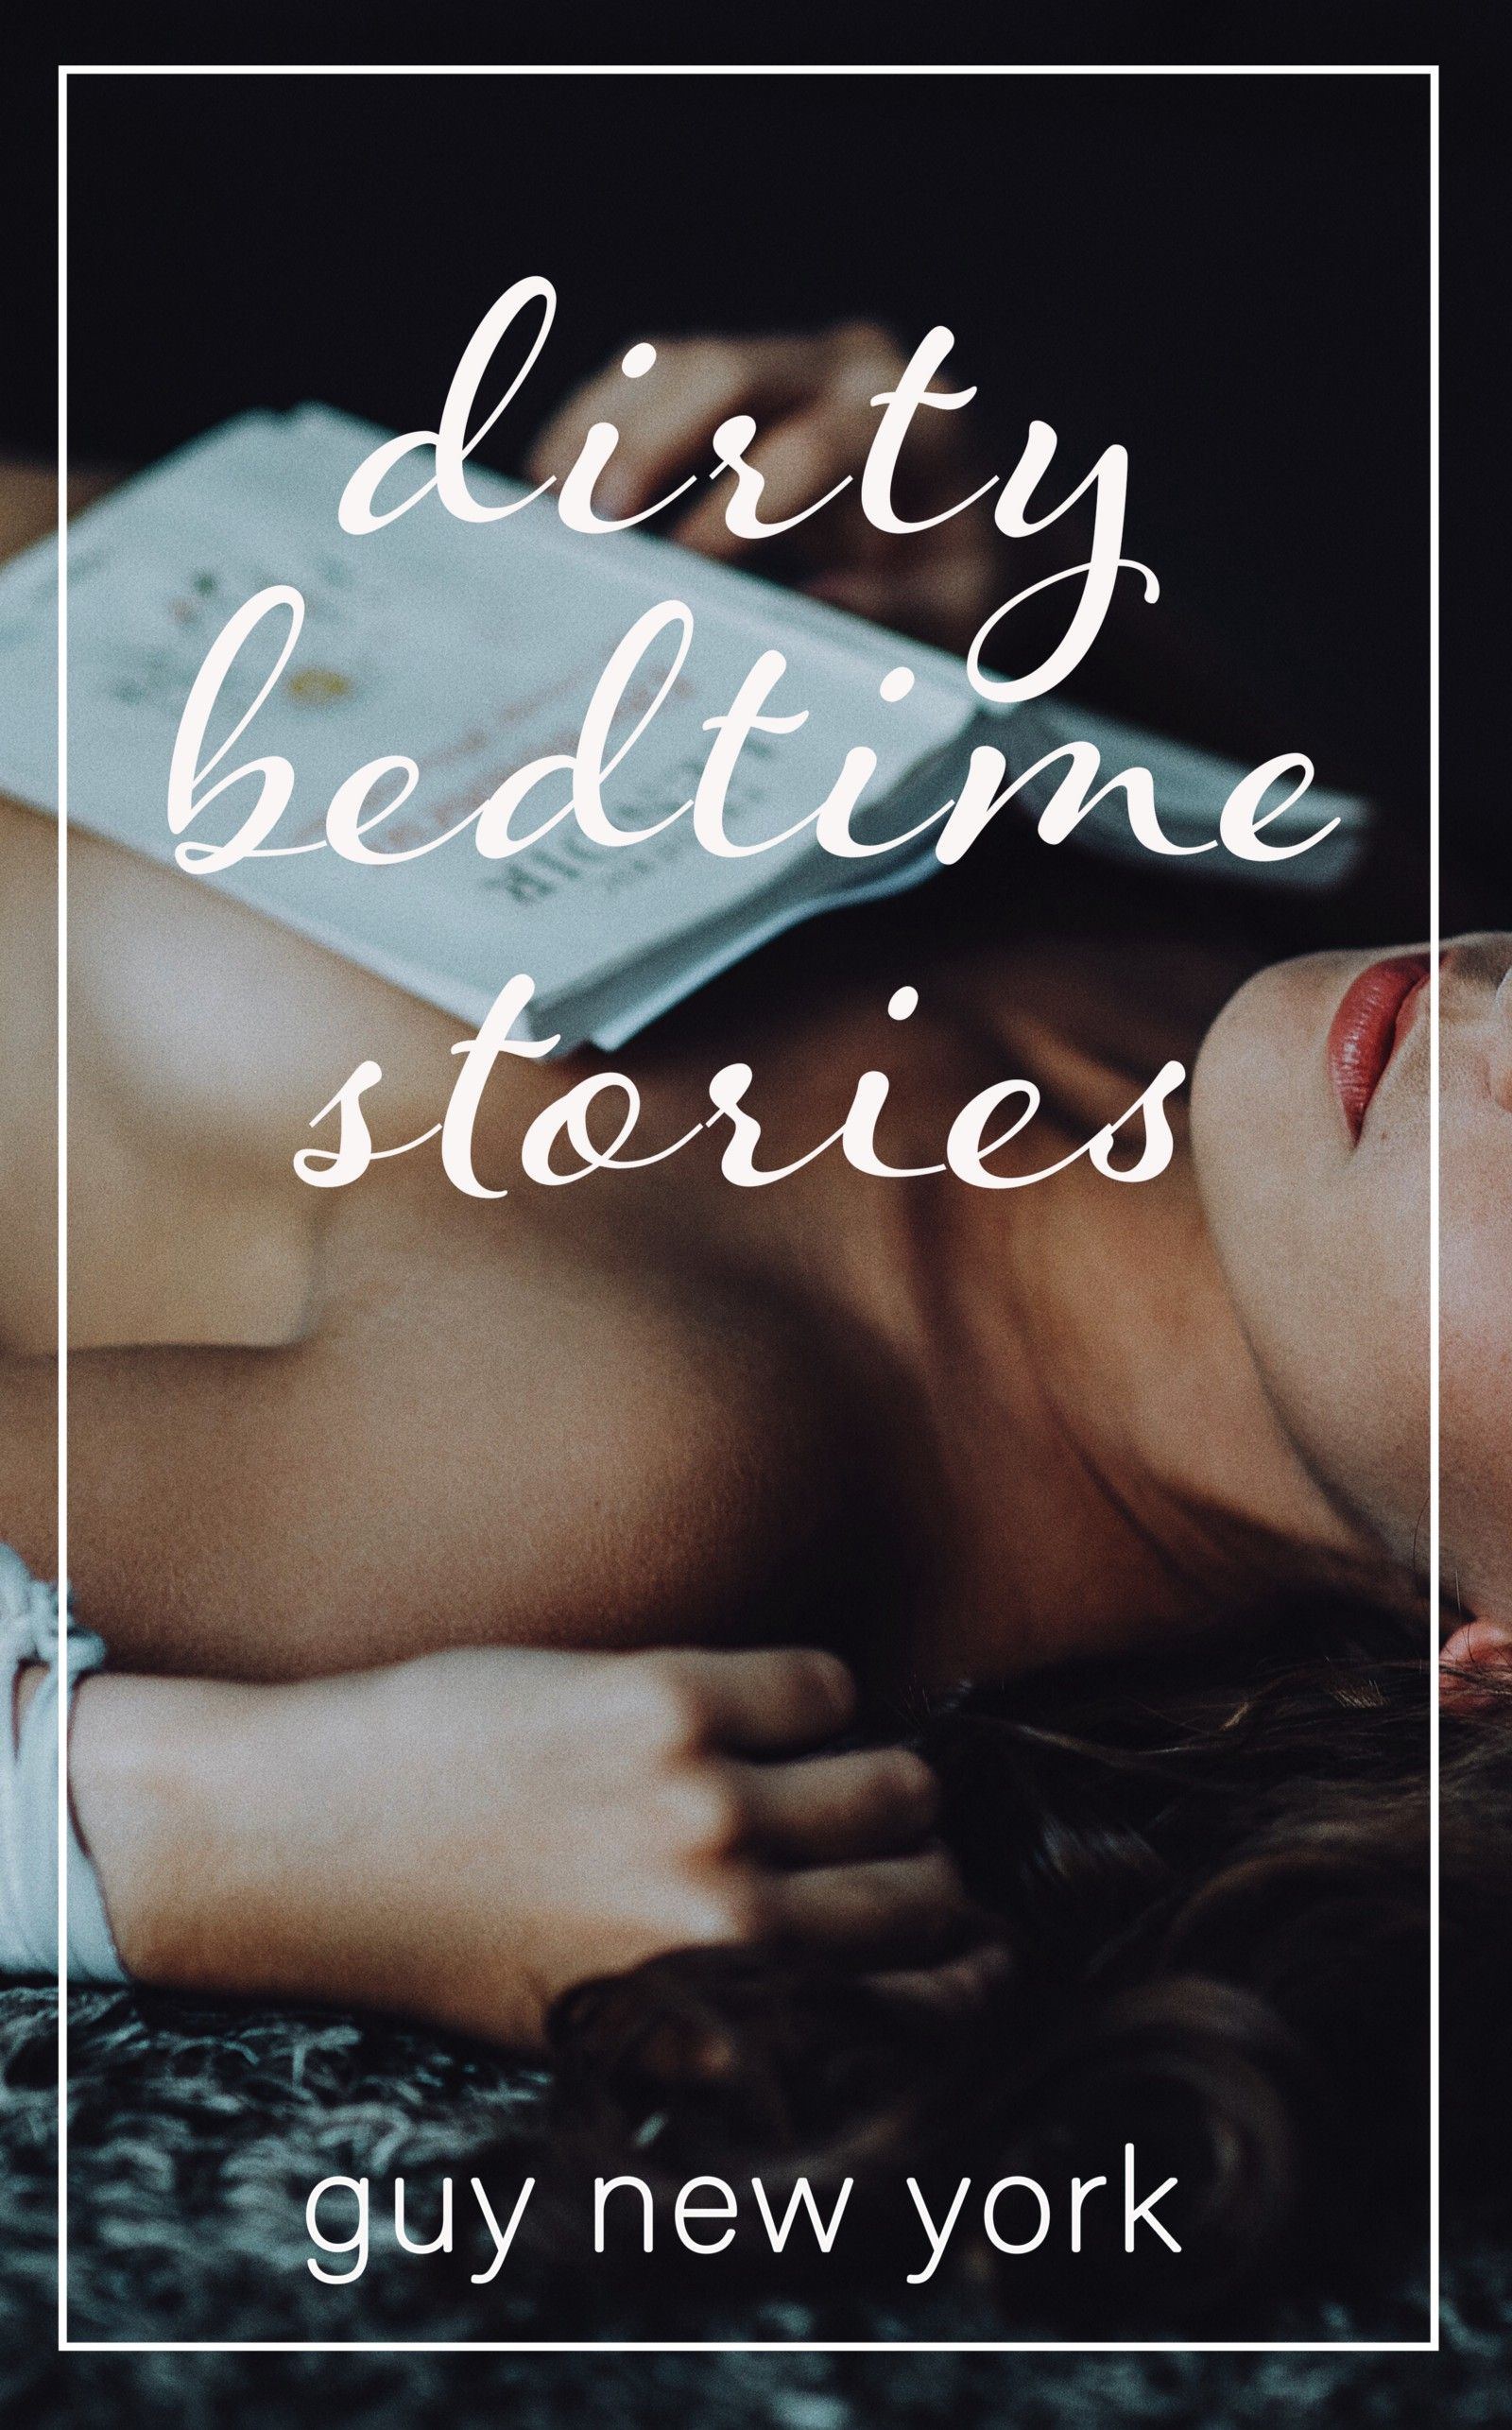 Sherry recommend best of Erotic bedtime sex stories